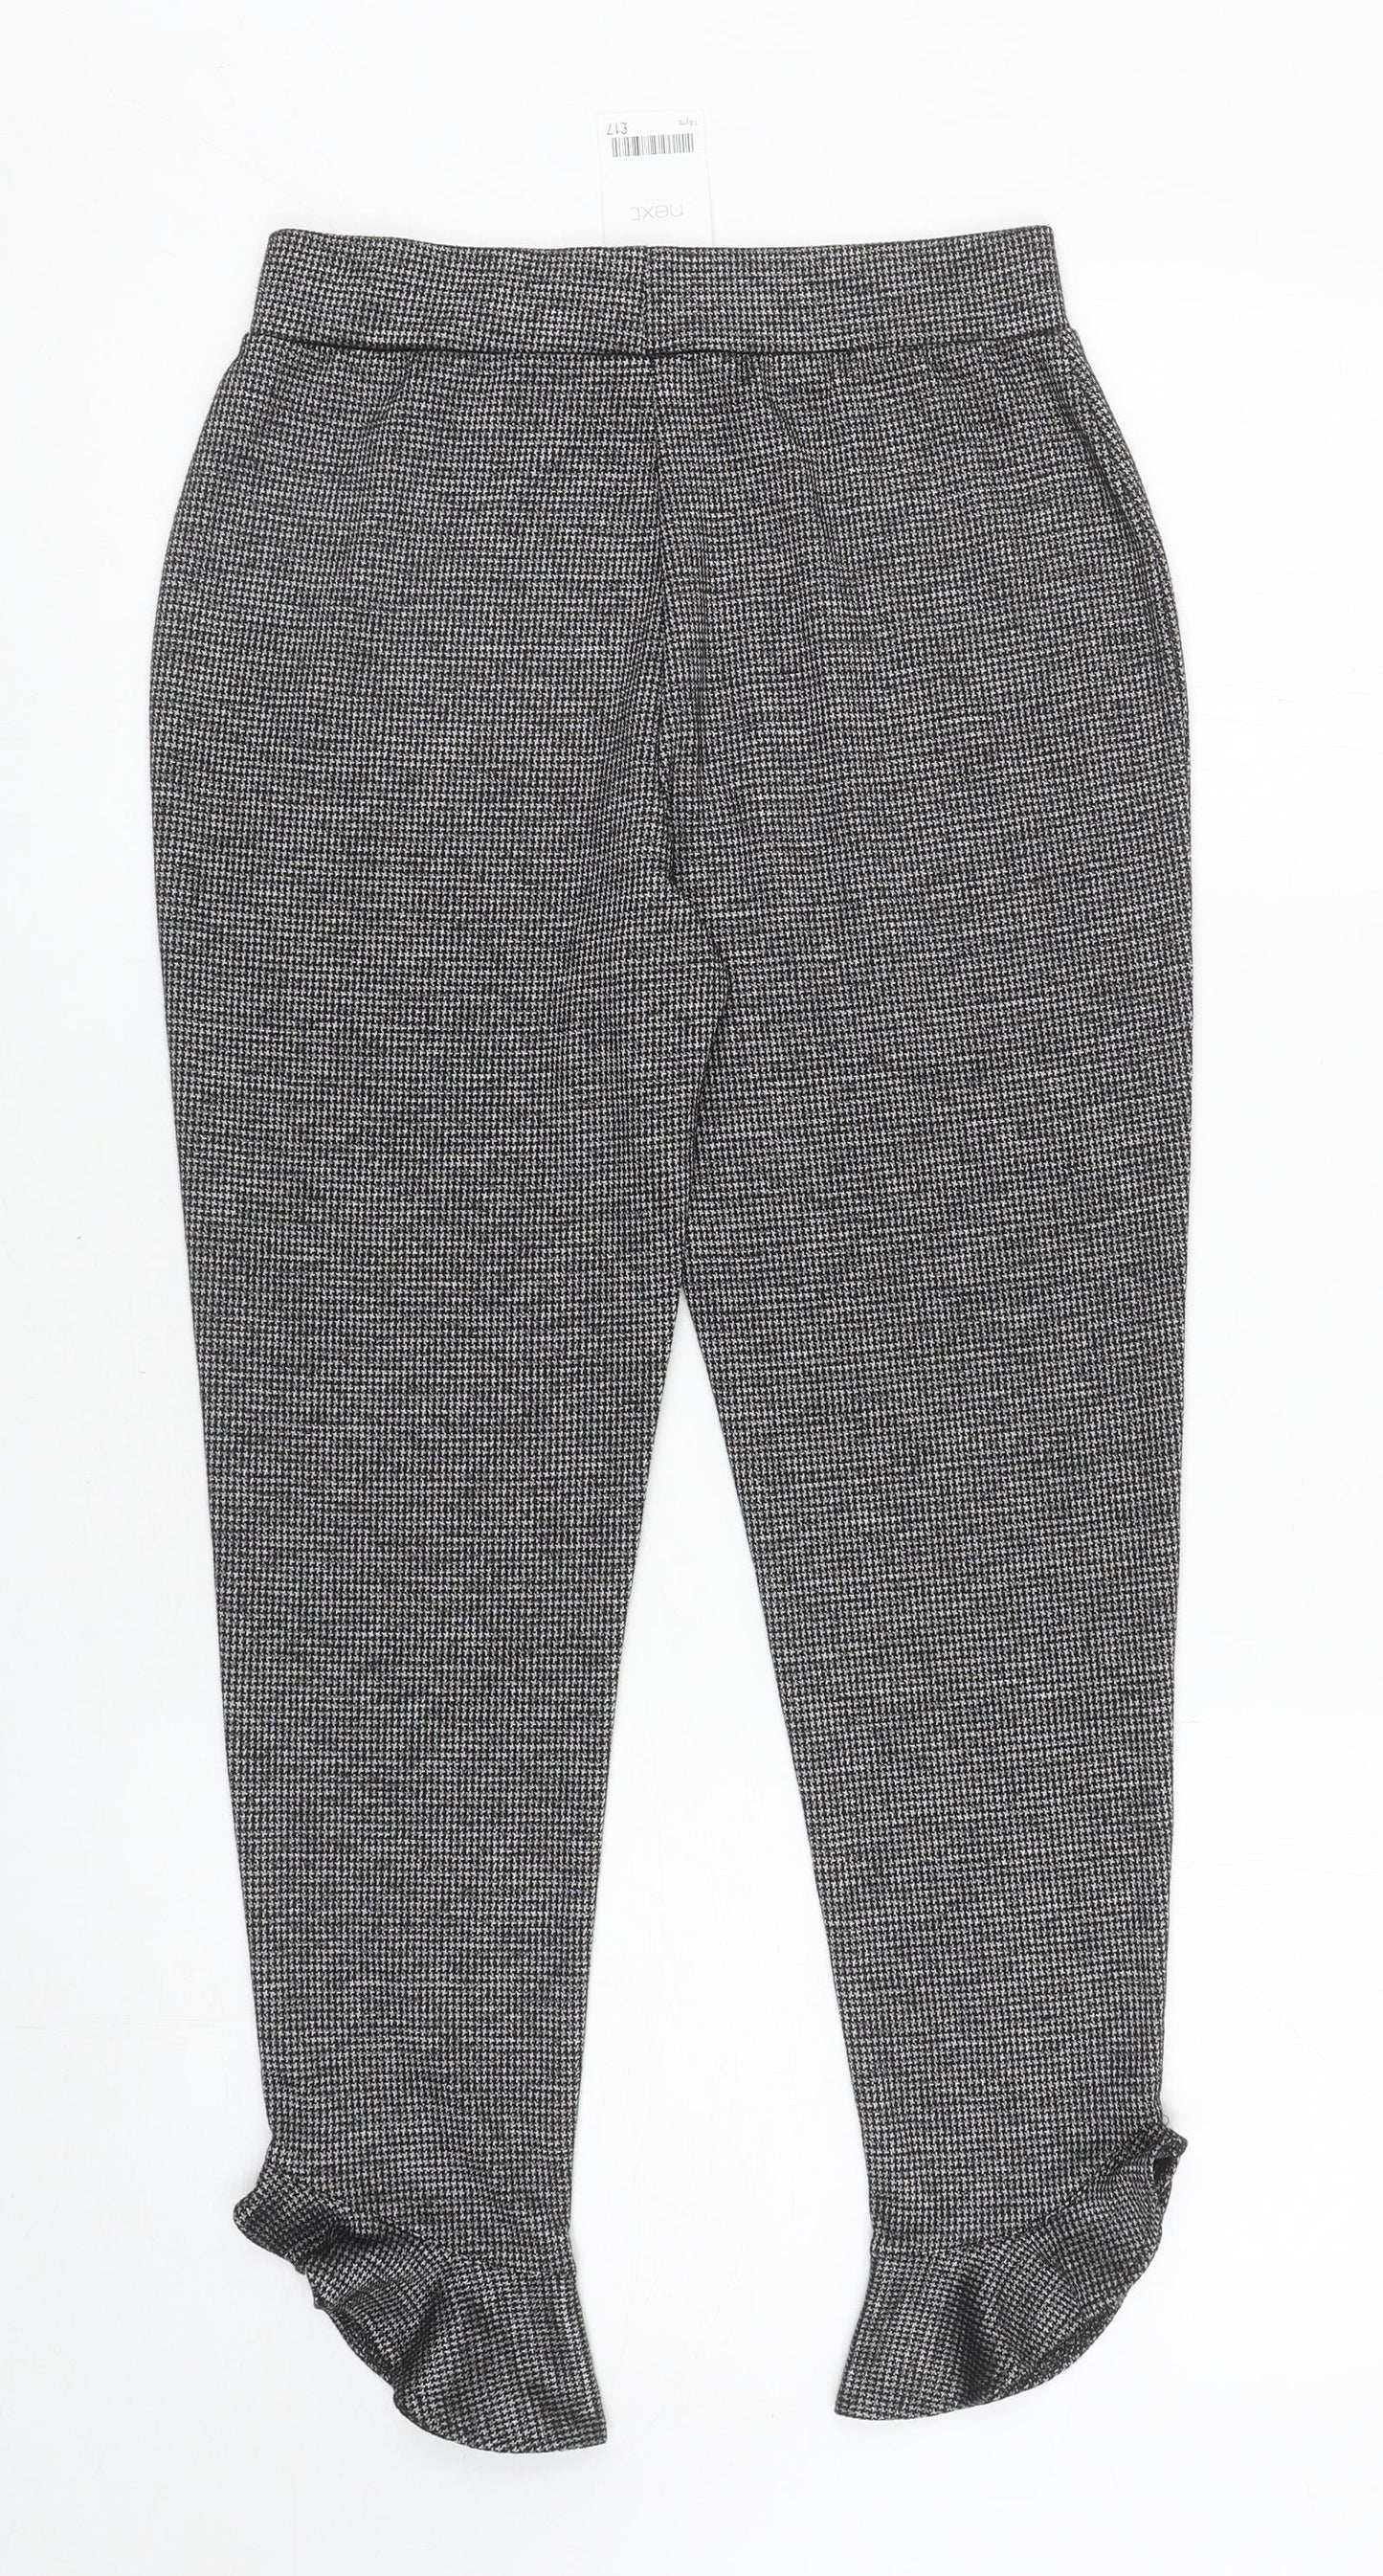 NEXT Girls Grey Houndstooth Polyester Jogger Trousers Size 14 Years L25 in Regular Pullover